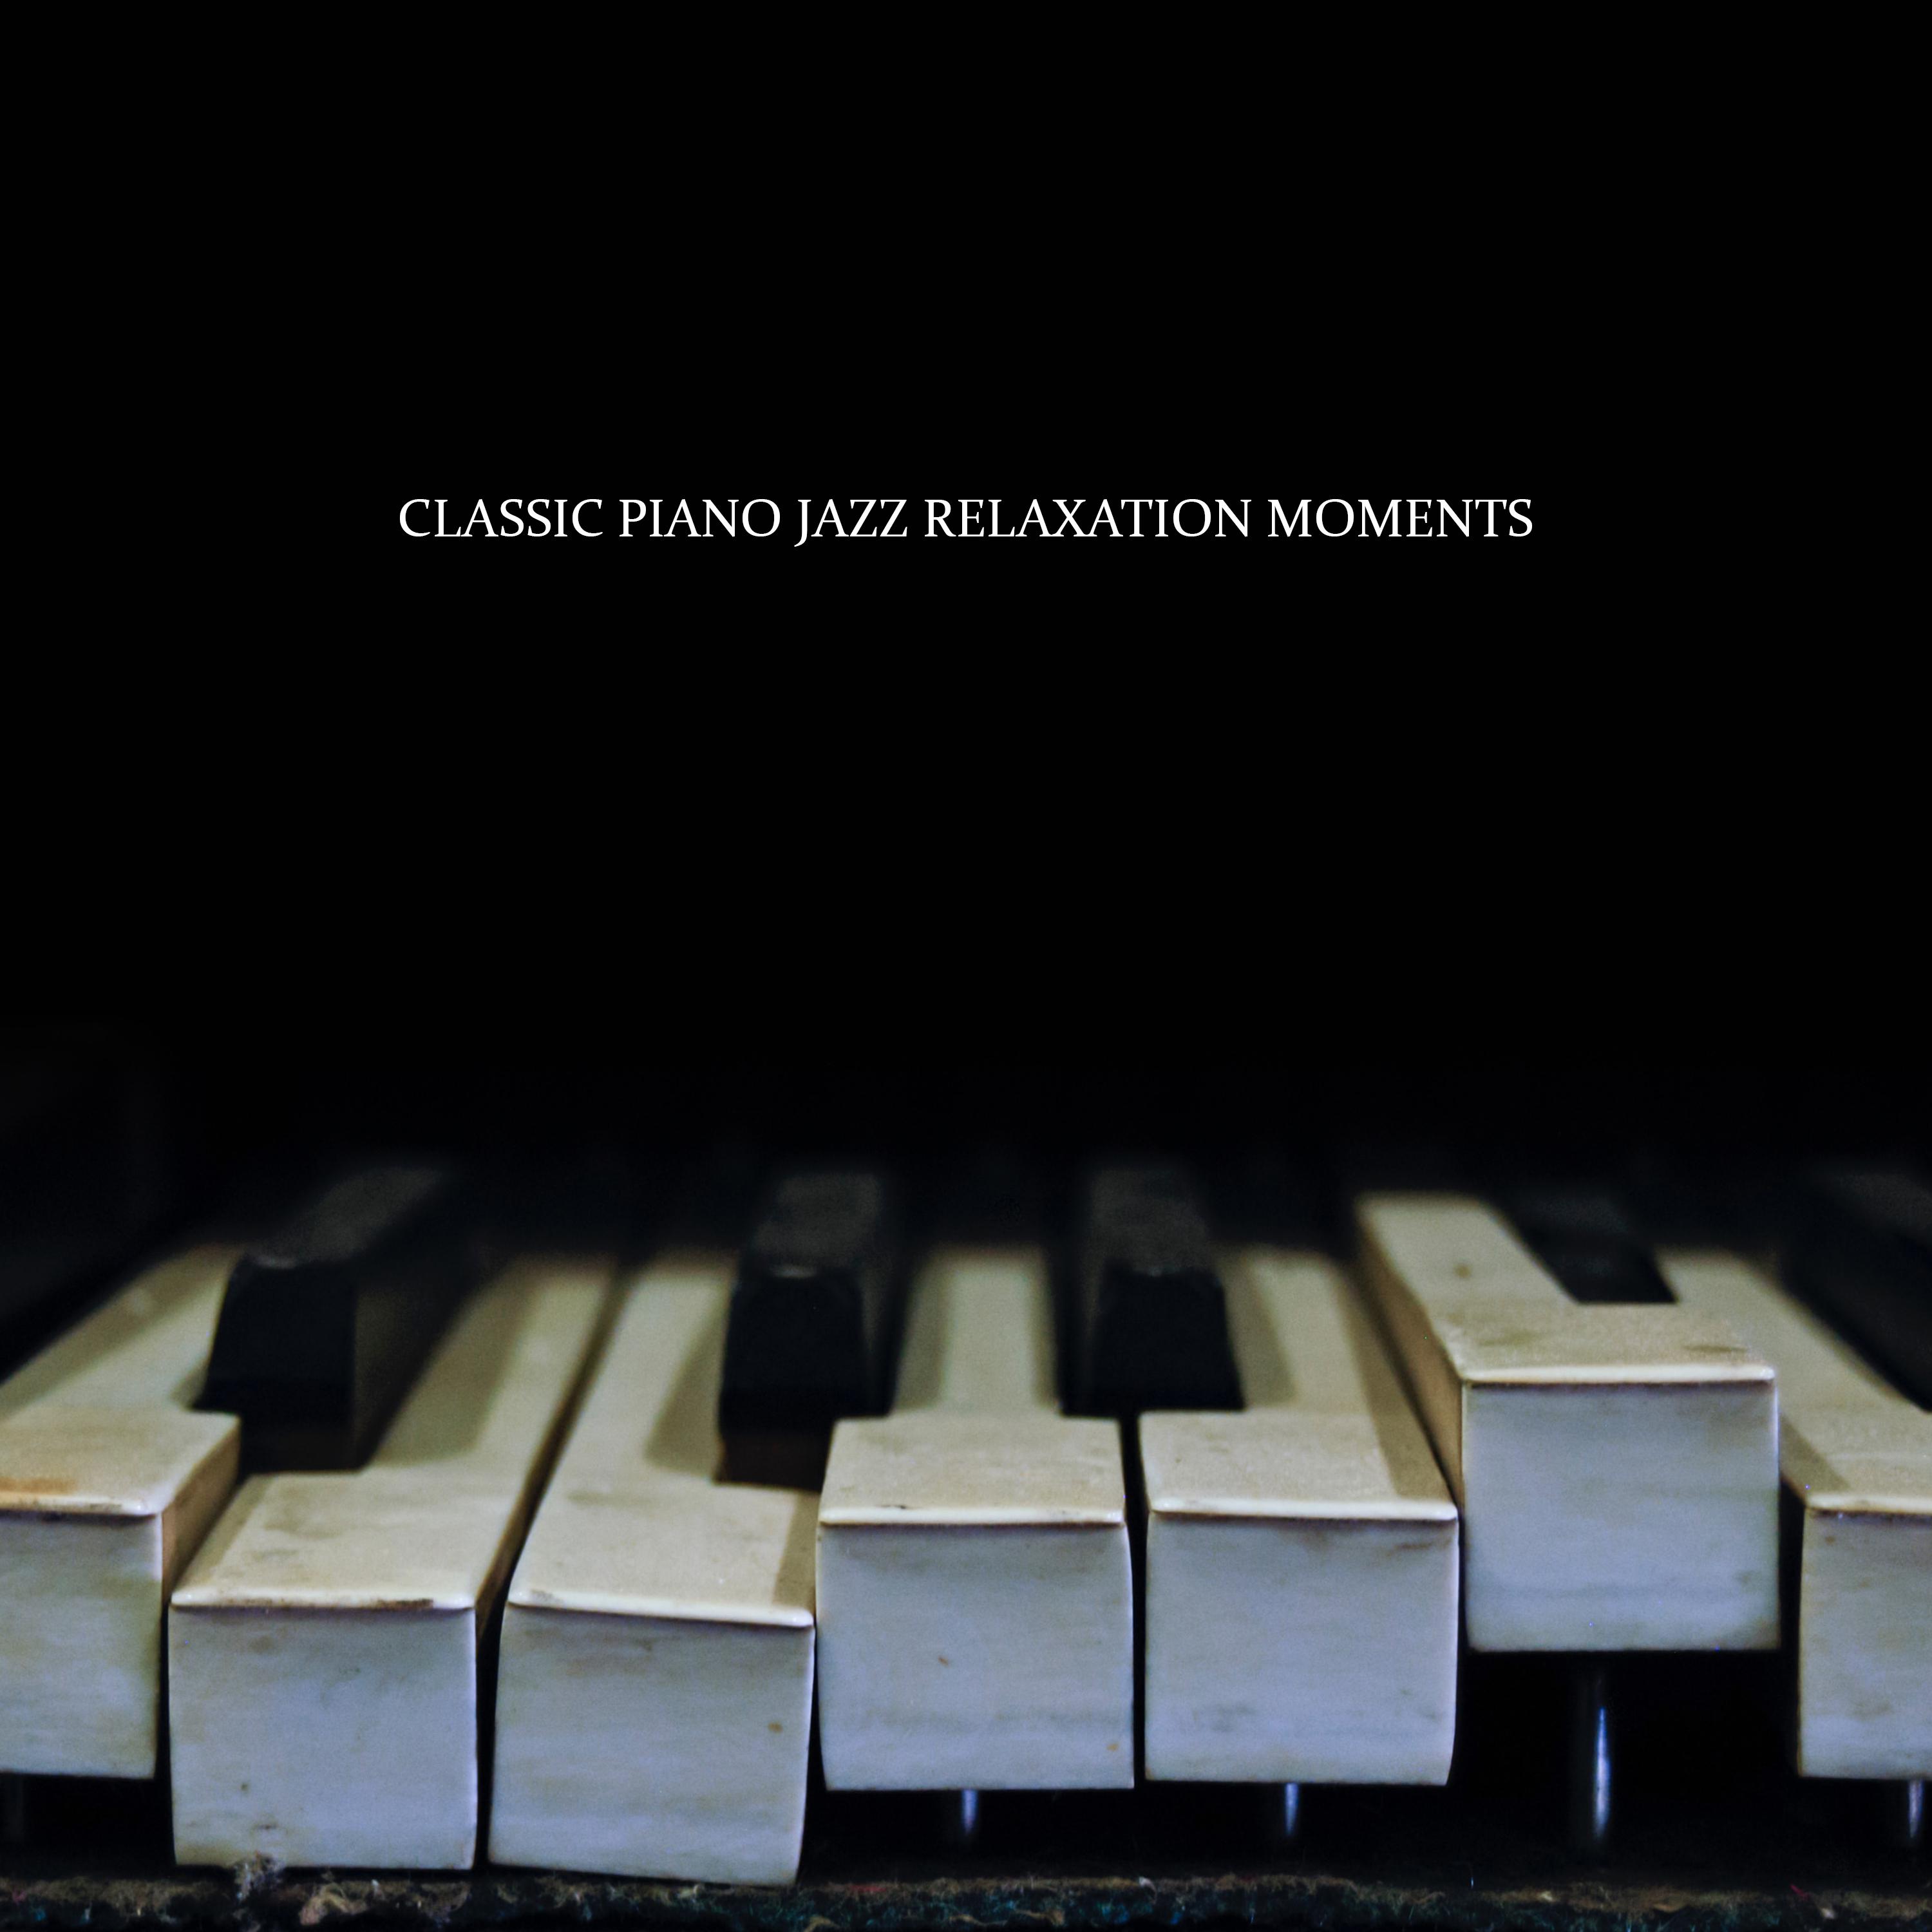 Classic Piano Jazz Relaxation Moments: 2019 Soft Instrumental Piano Music for Many Relaxing Moments, Rest After Long Day, Afternoon Coffee, Spending Blissful Time with Love